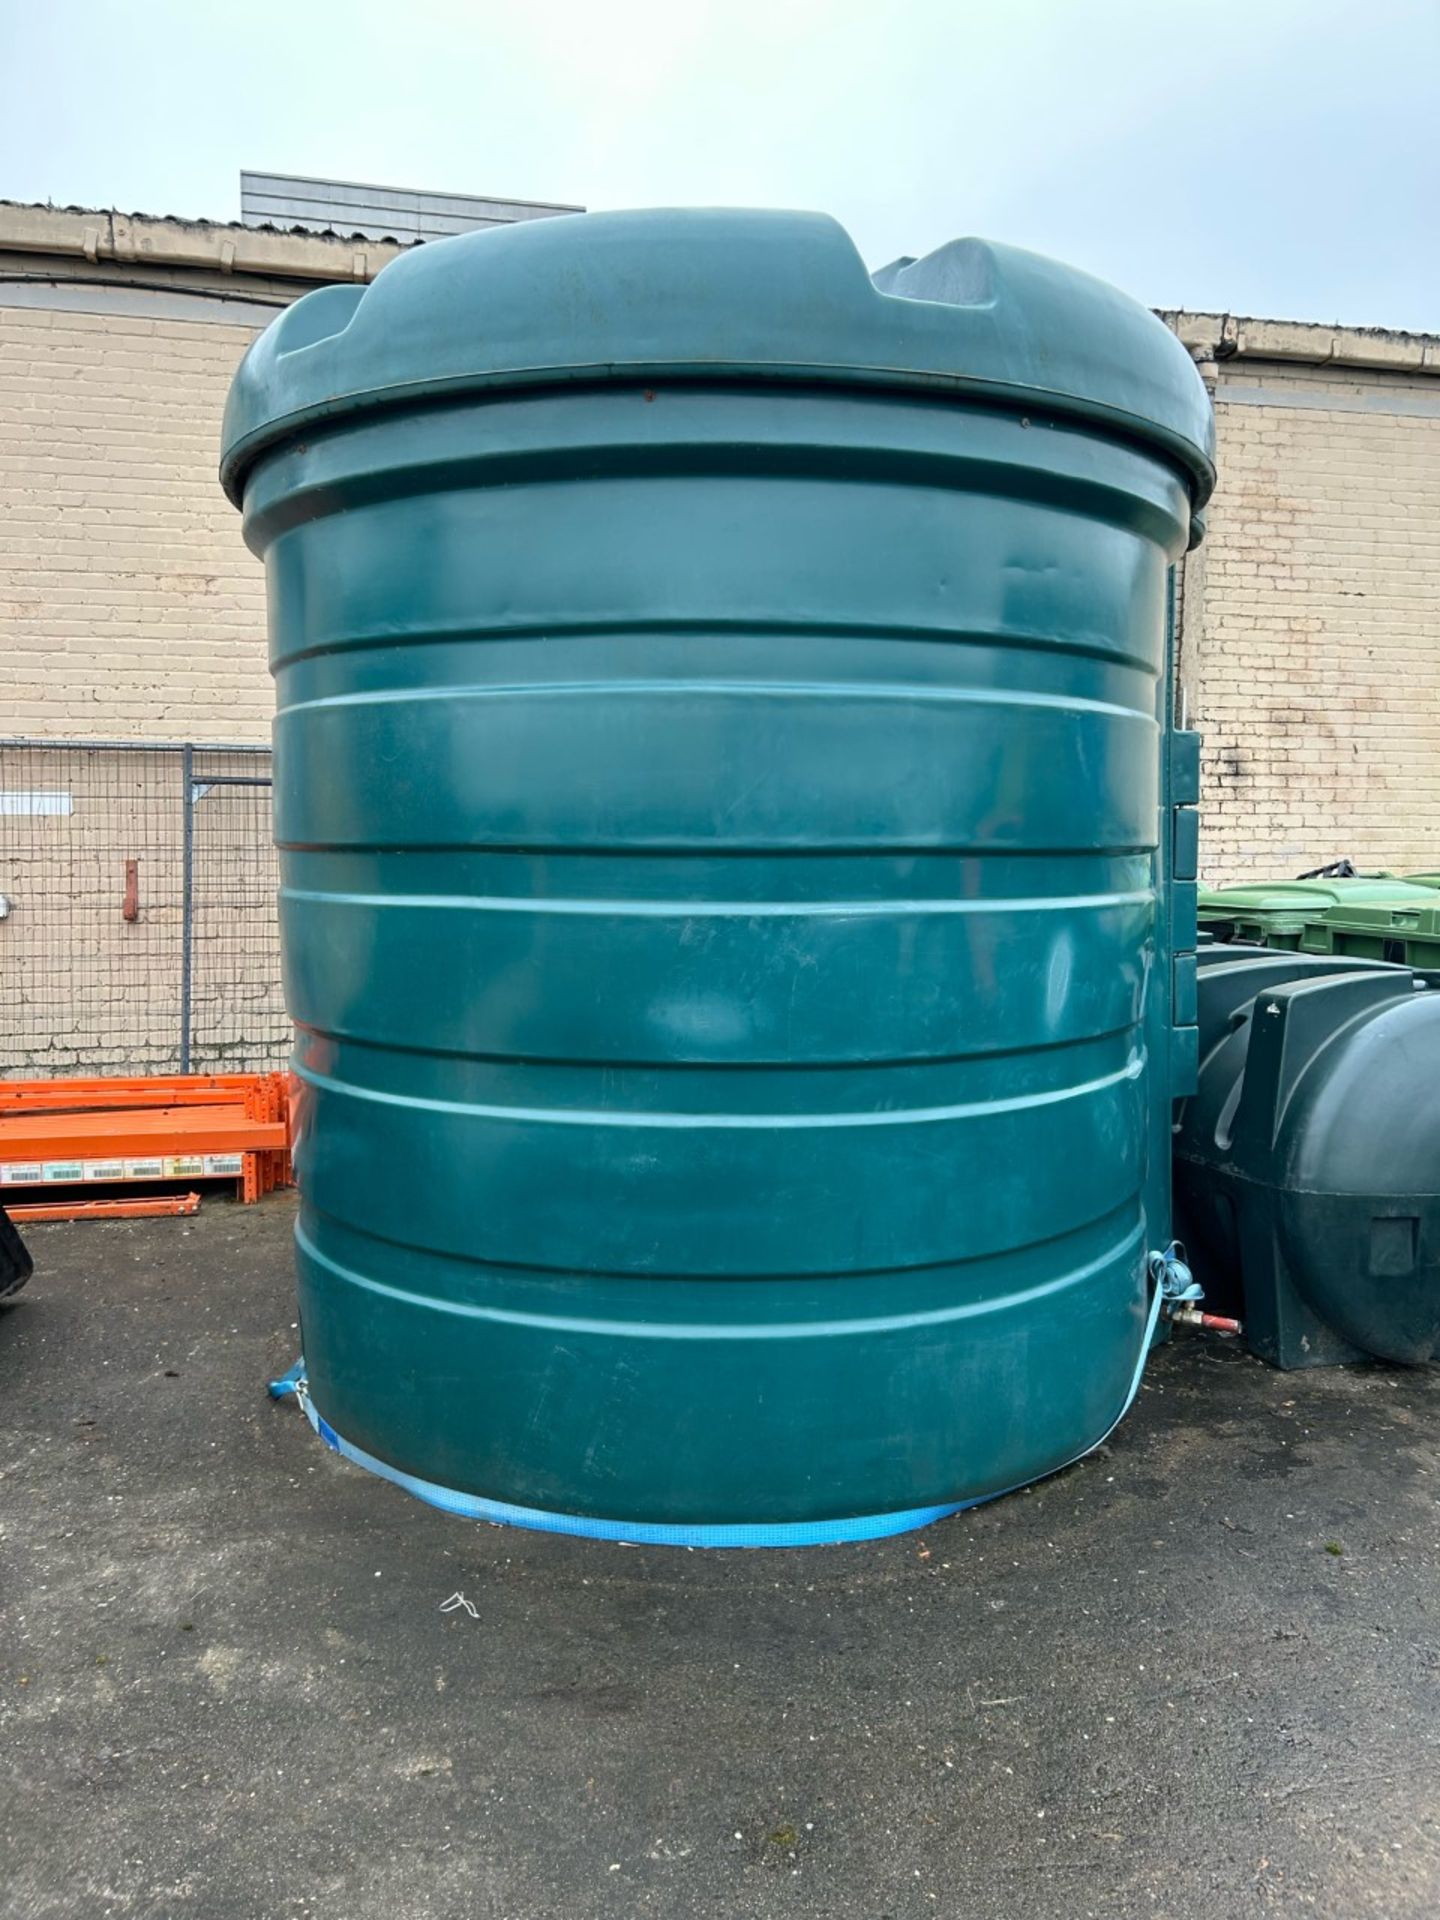 10,000 litre tank good for a lot of different things fairly new and is what it is supposed to be